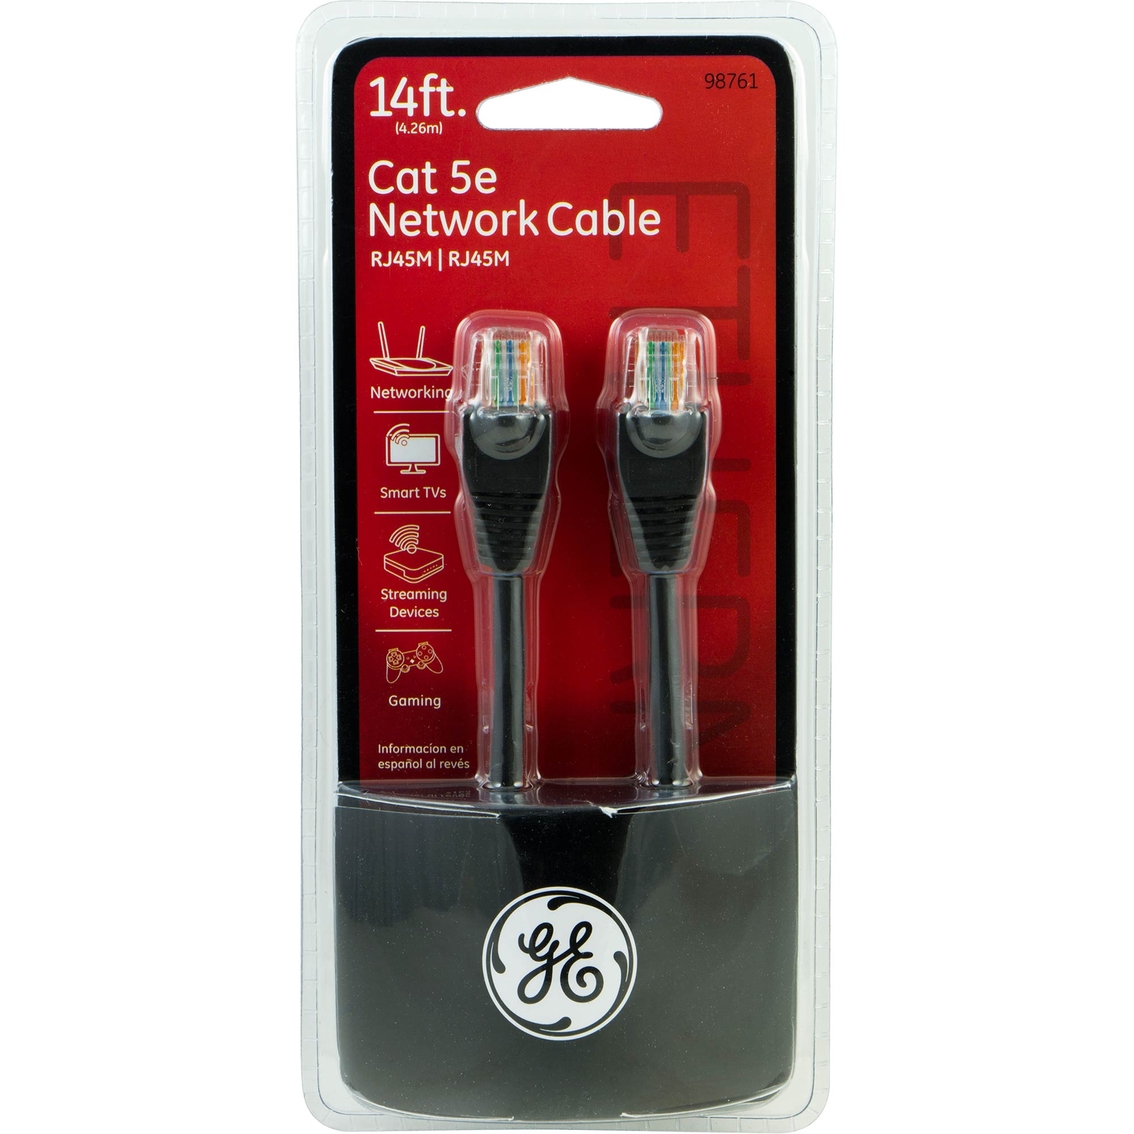 GE Cat 5e 14 ft. Network Cable (14 ft.) - Image 2 of 2